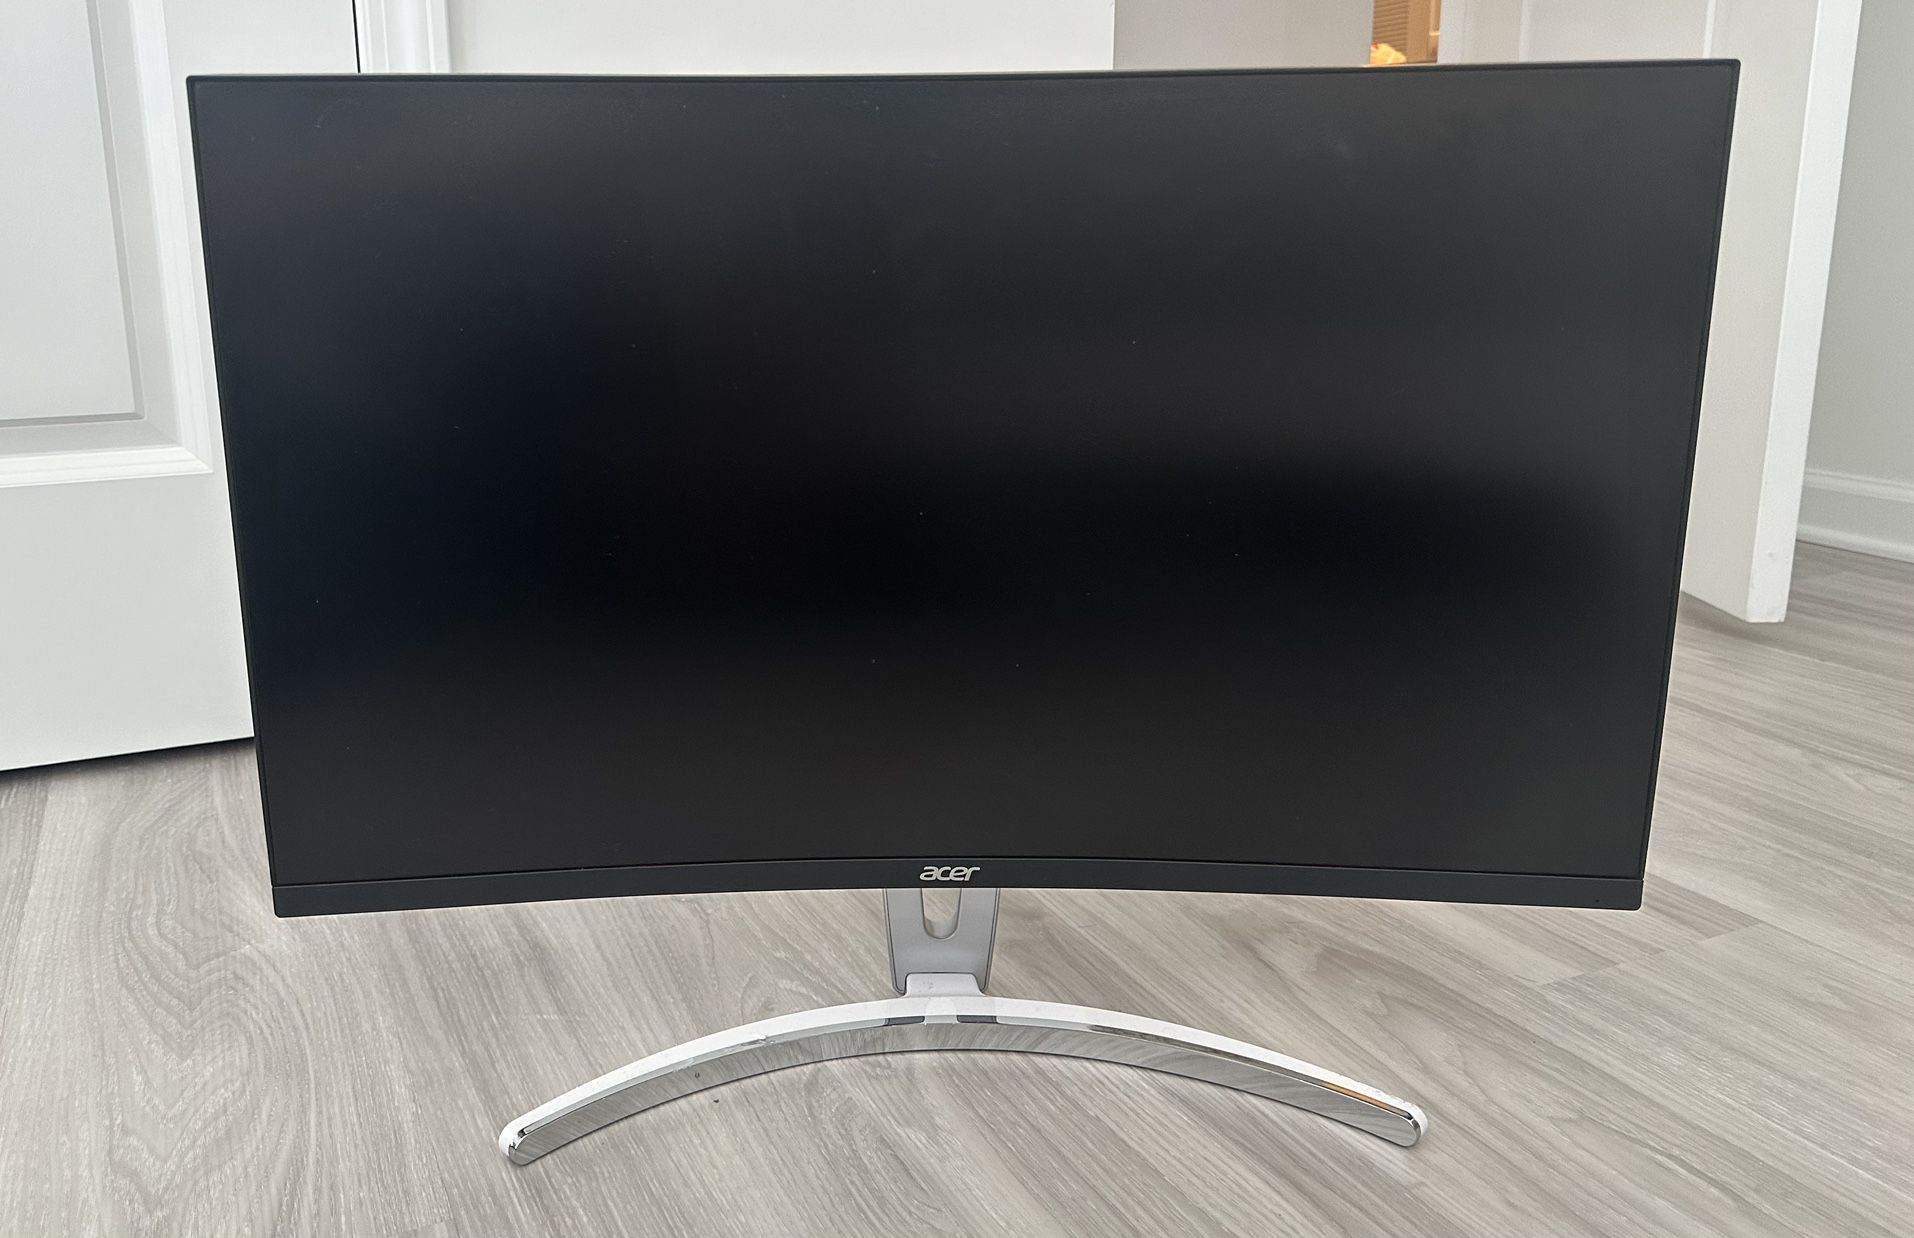 Acer ED273 Abidpx 27" Full HD 144Hz G-SYNC Curved Gaming Monitor